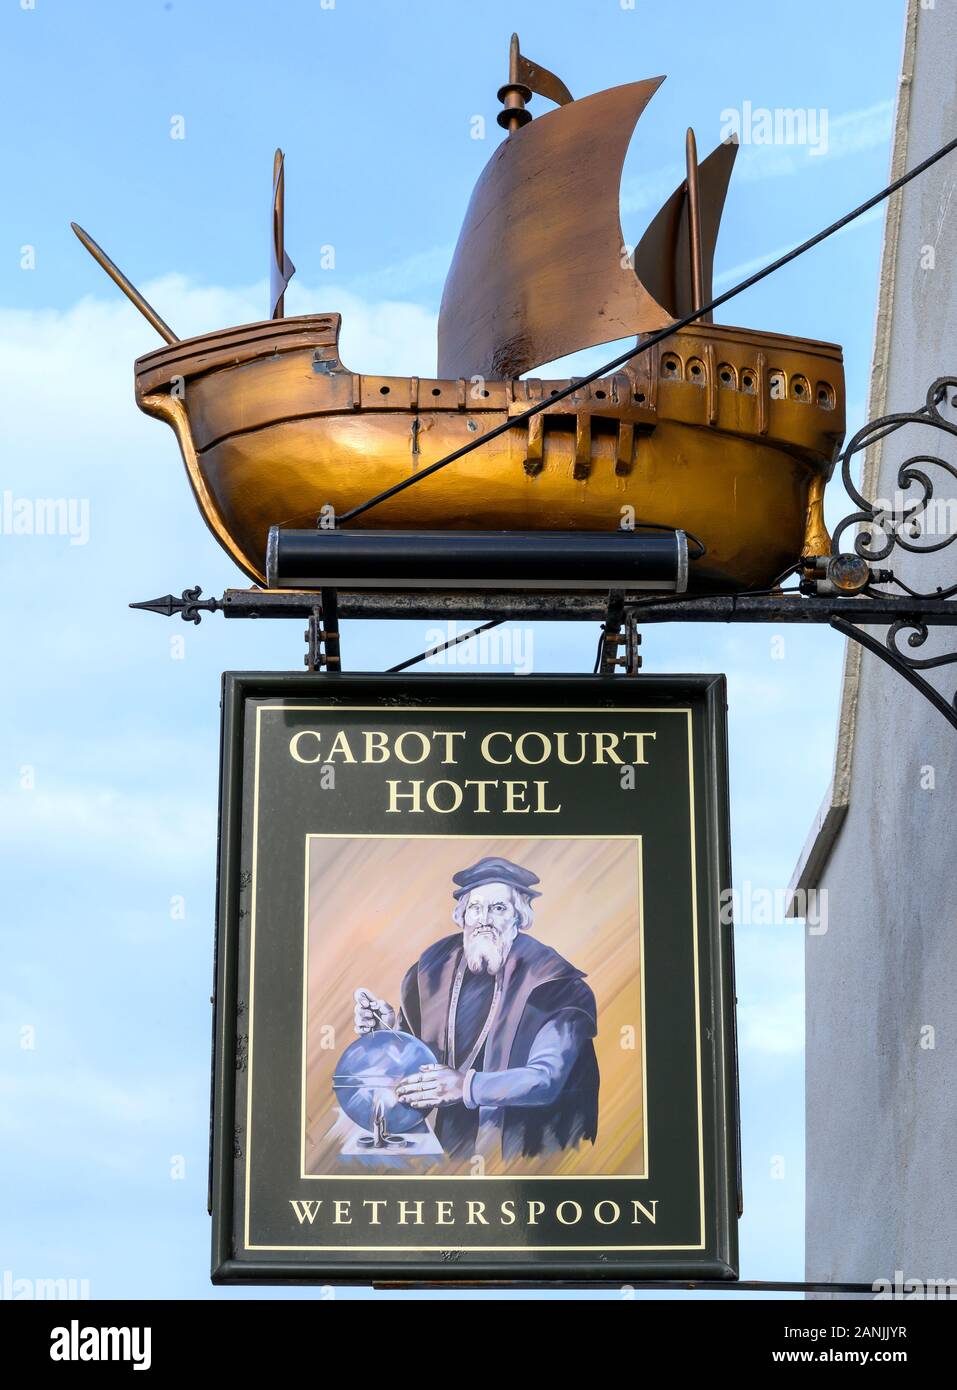 Hanging pub sign at Cabot Court Hotel a Weatherspoon public house, Knightstone Road, Weston-Super-Mare, Somerset, England, UK Stock Photo